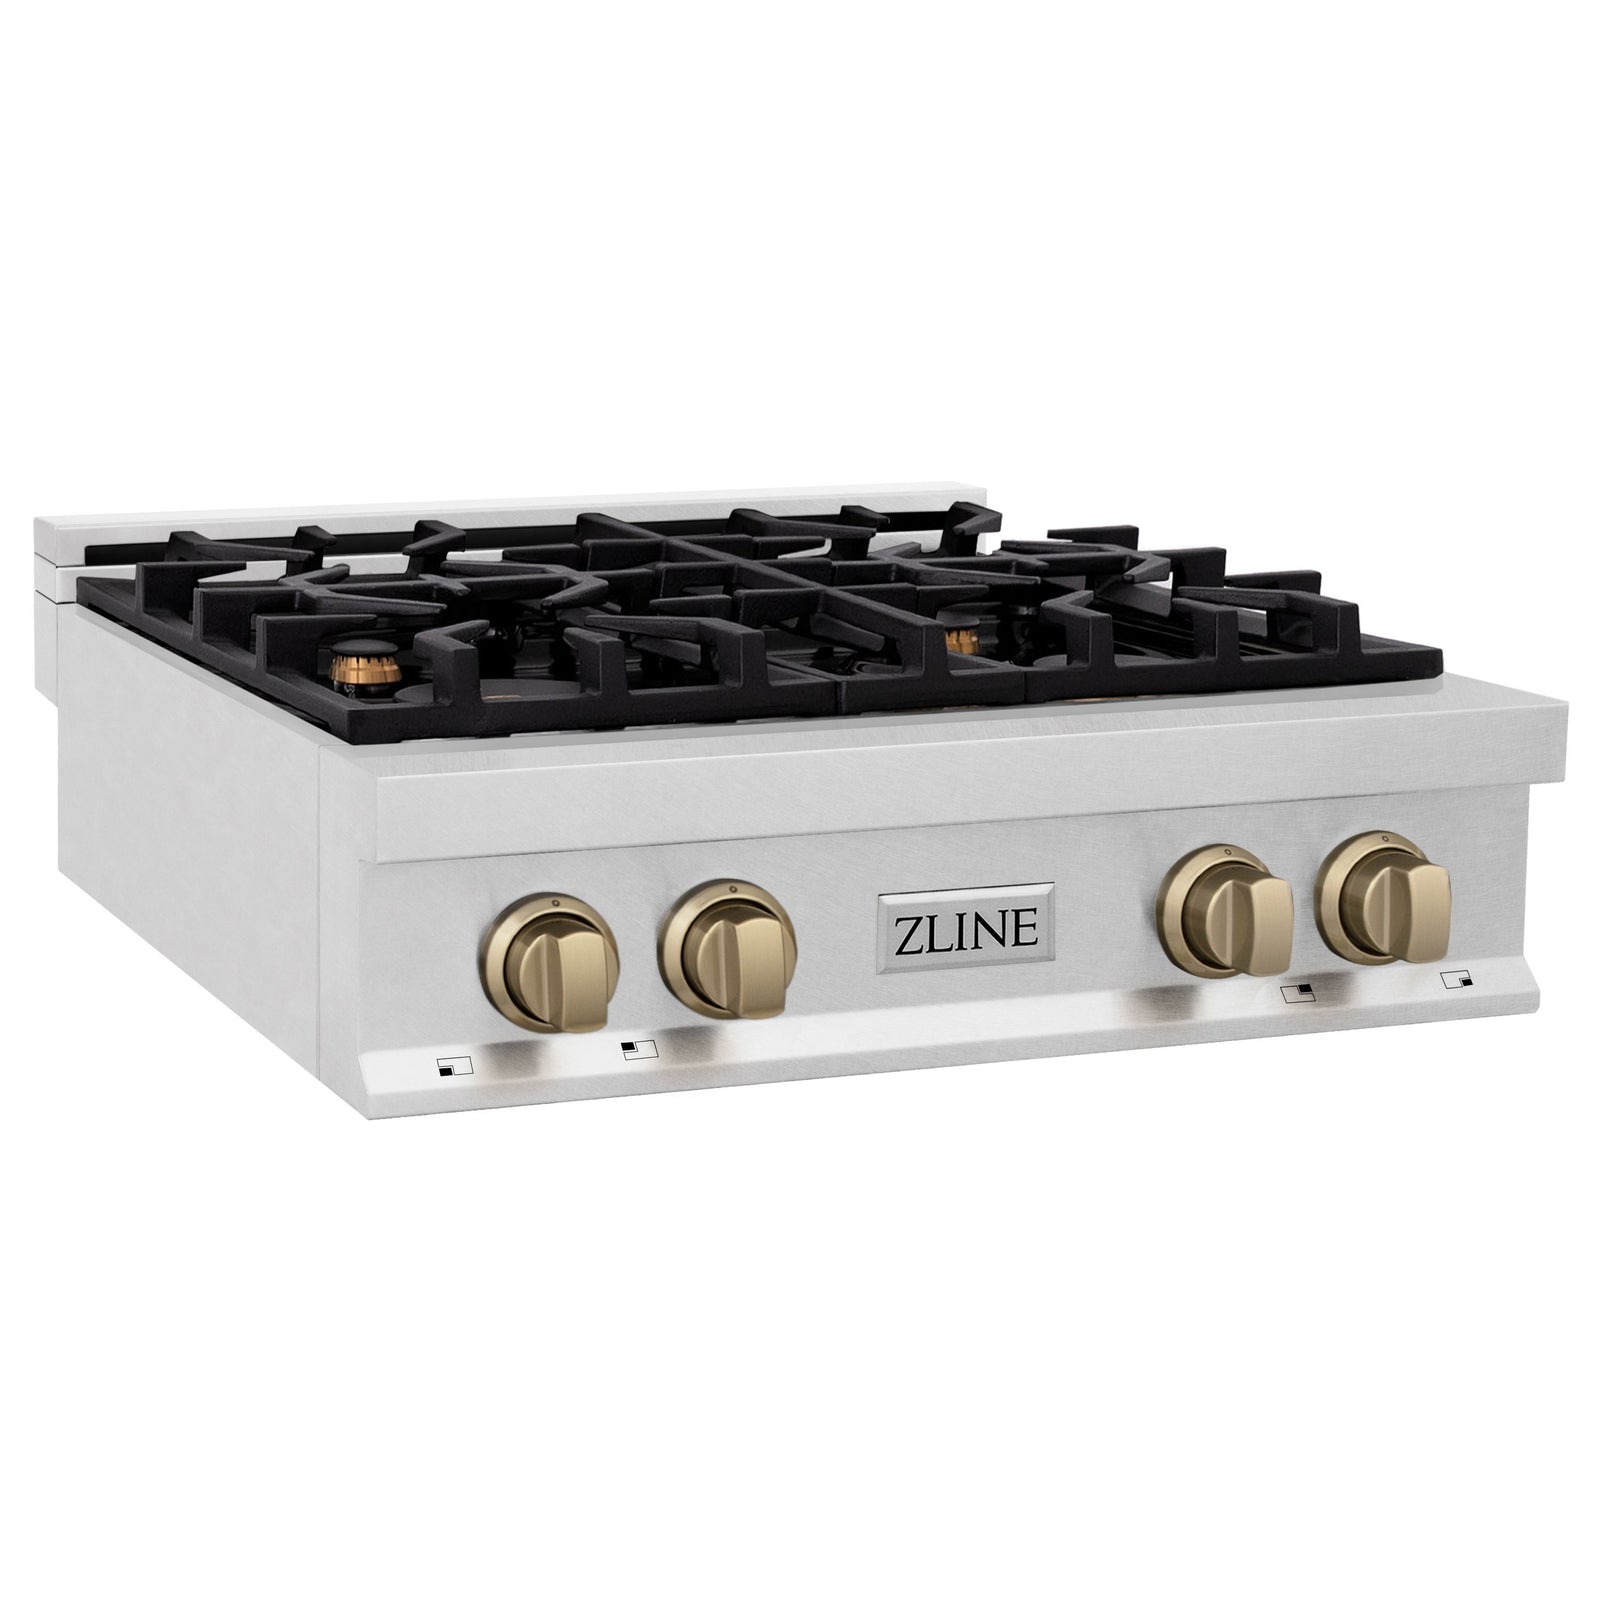 ZLINE Autograph Edition 30 In. Rangetop with 4 Gas Burners in DuraSnow®Stainless Steel and Champagne Bronze Accents, RTSZ-30-CB - Smart Kitchen Lab